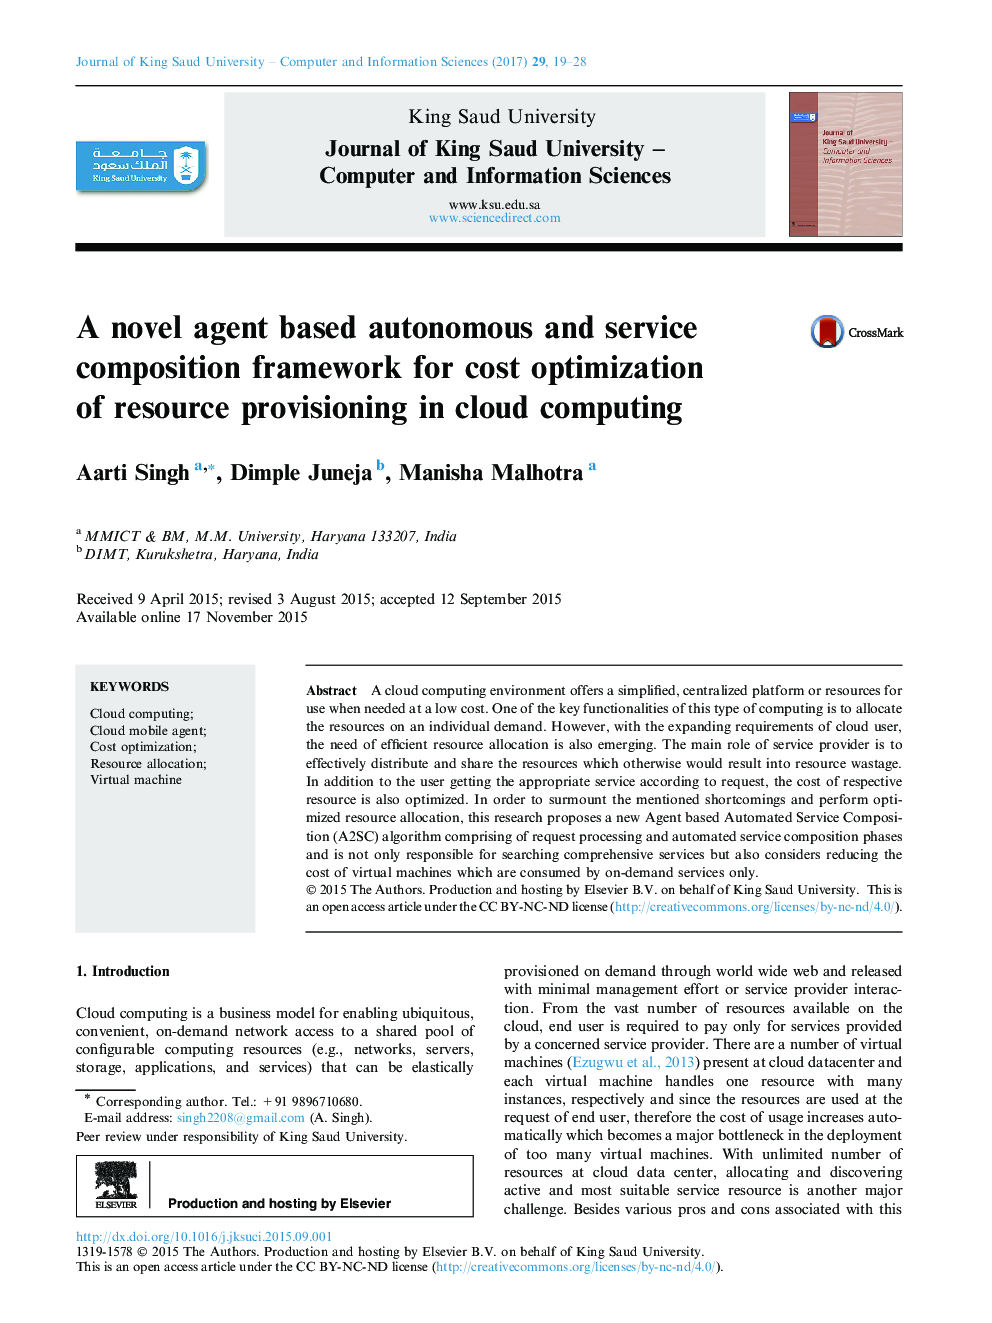 A novel agent based autonomous and service composition framework for cost optimization of resource provisioning in cloud computing